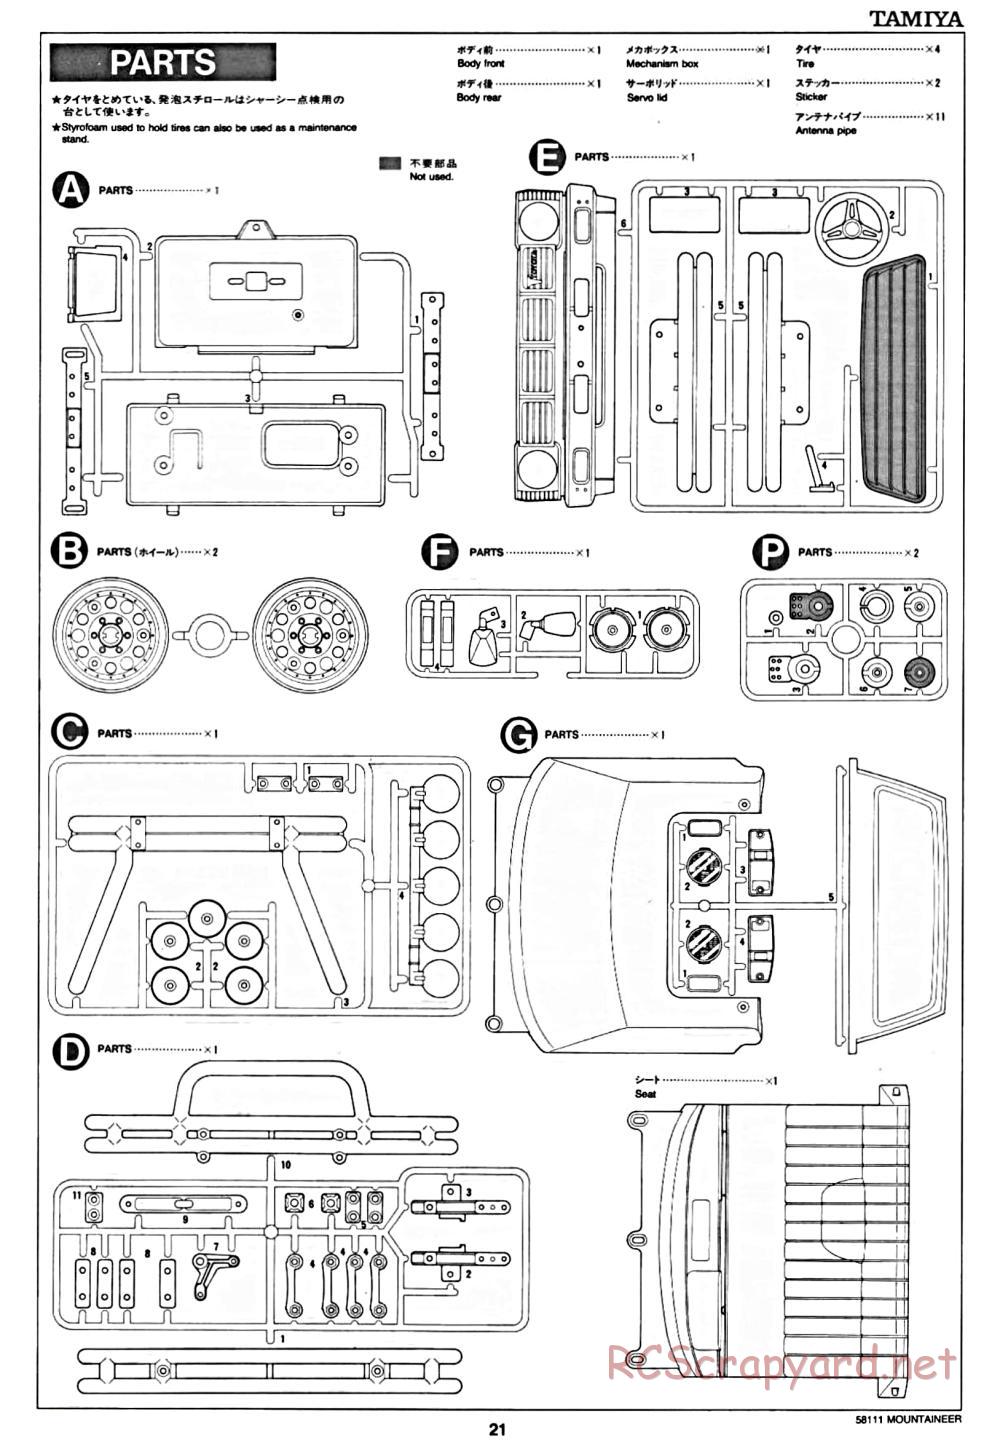 Tamiya - Toyota 4x4 Pick Up Mountaineer Chassis - Manual - Page 21